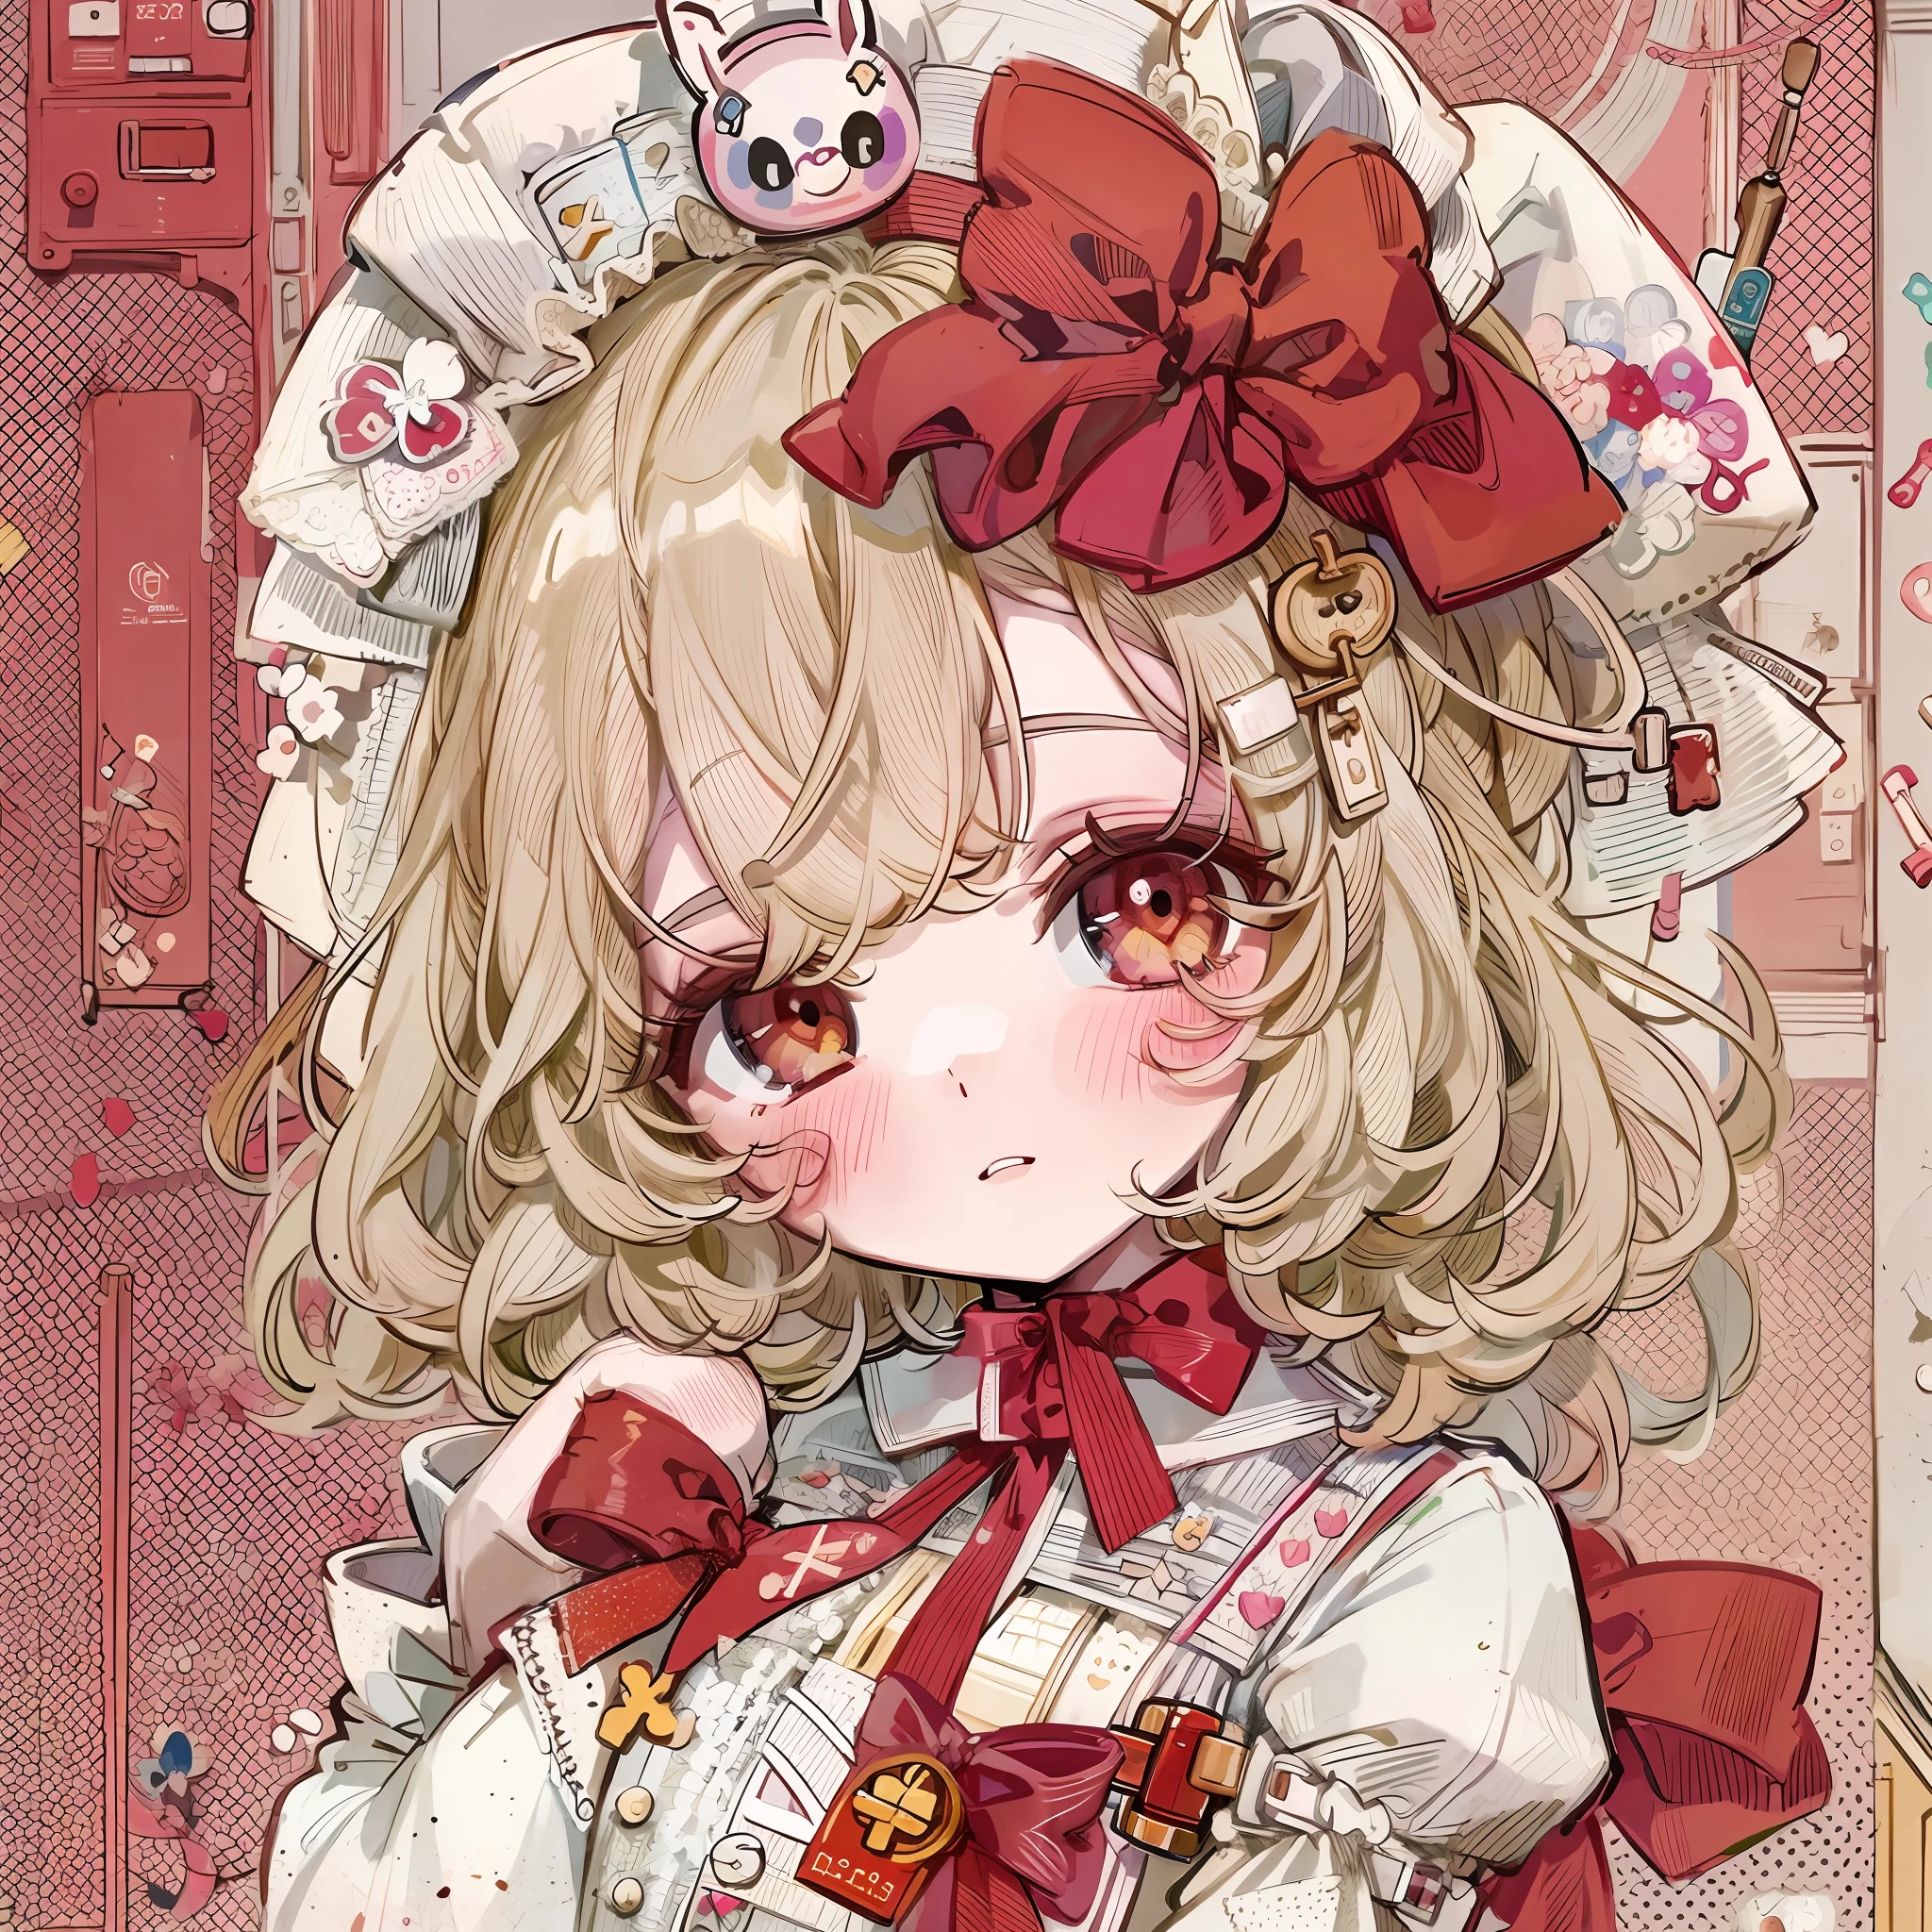 Character design，Q version，tchibi，Cute，The ratio of the head to the body，clothing design，Lolita prostitute，Gorgeous dresitts，curlies，very intricate，Exquisite，shift dresses，Bow knot，frilld，ribbon，bandagens，Nurse style，Huge syringe，pill，Red Cross，Y2K，E-girls，Unilateral eye patch，Love decoration，subculture，Sick，bloods